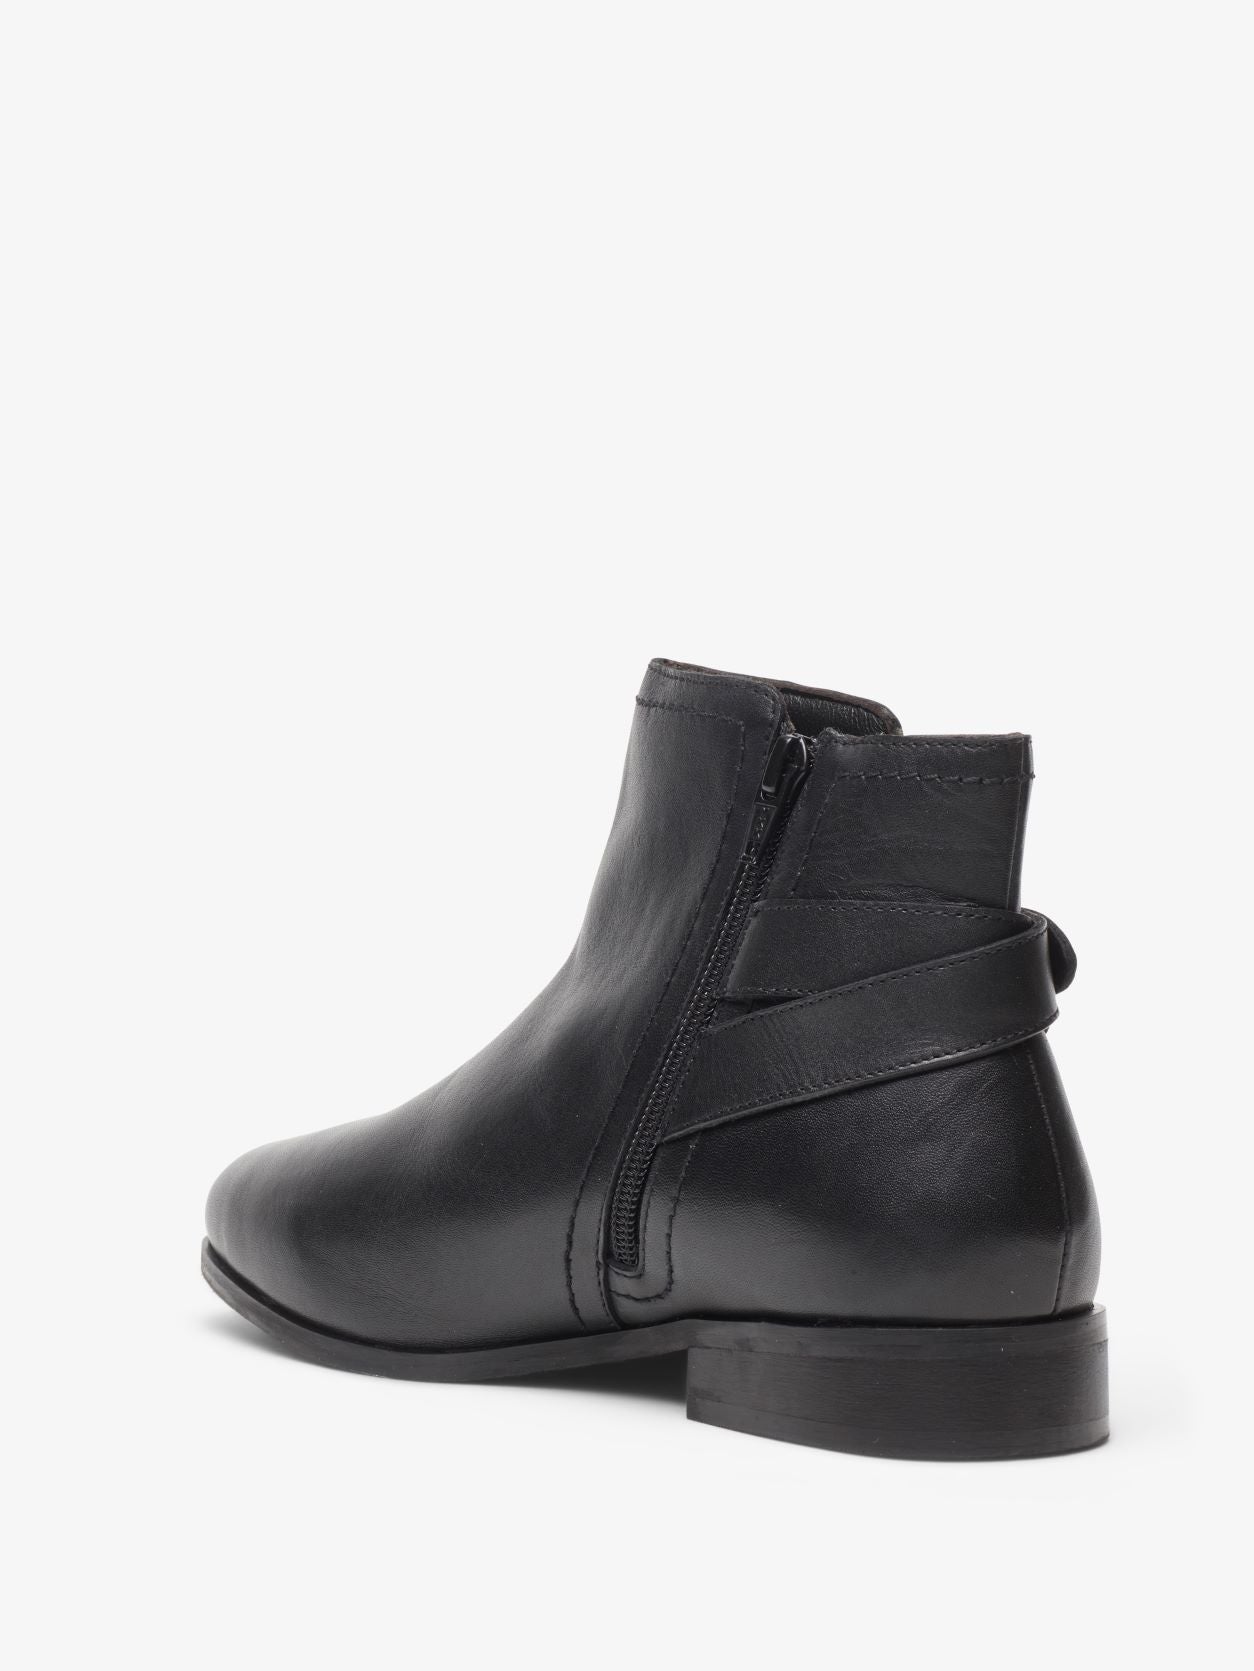 Wide Fit Black Leather Buckle Detail Leather Ankle Boots